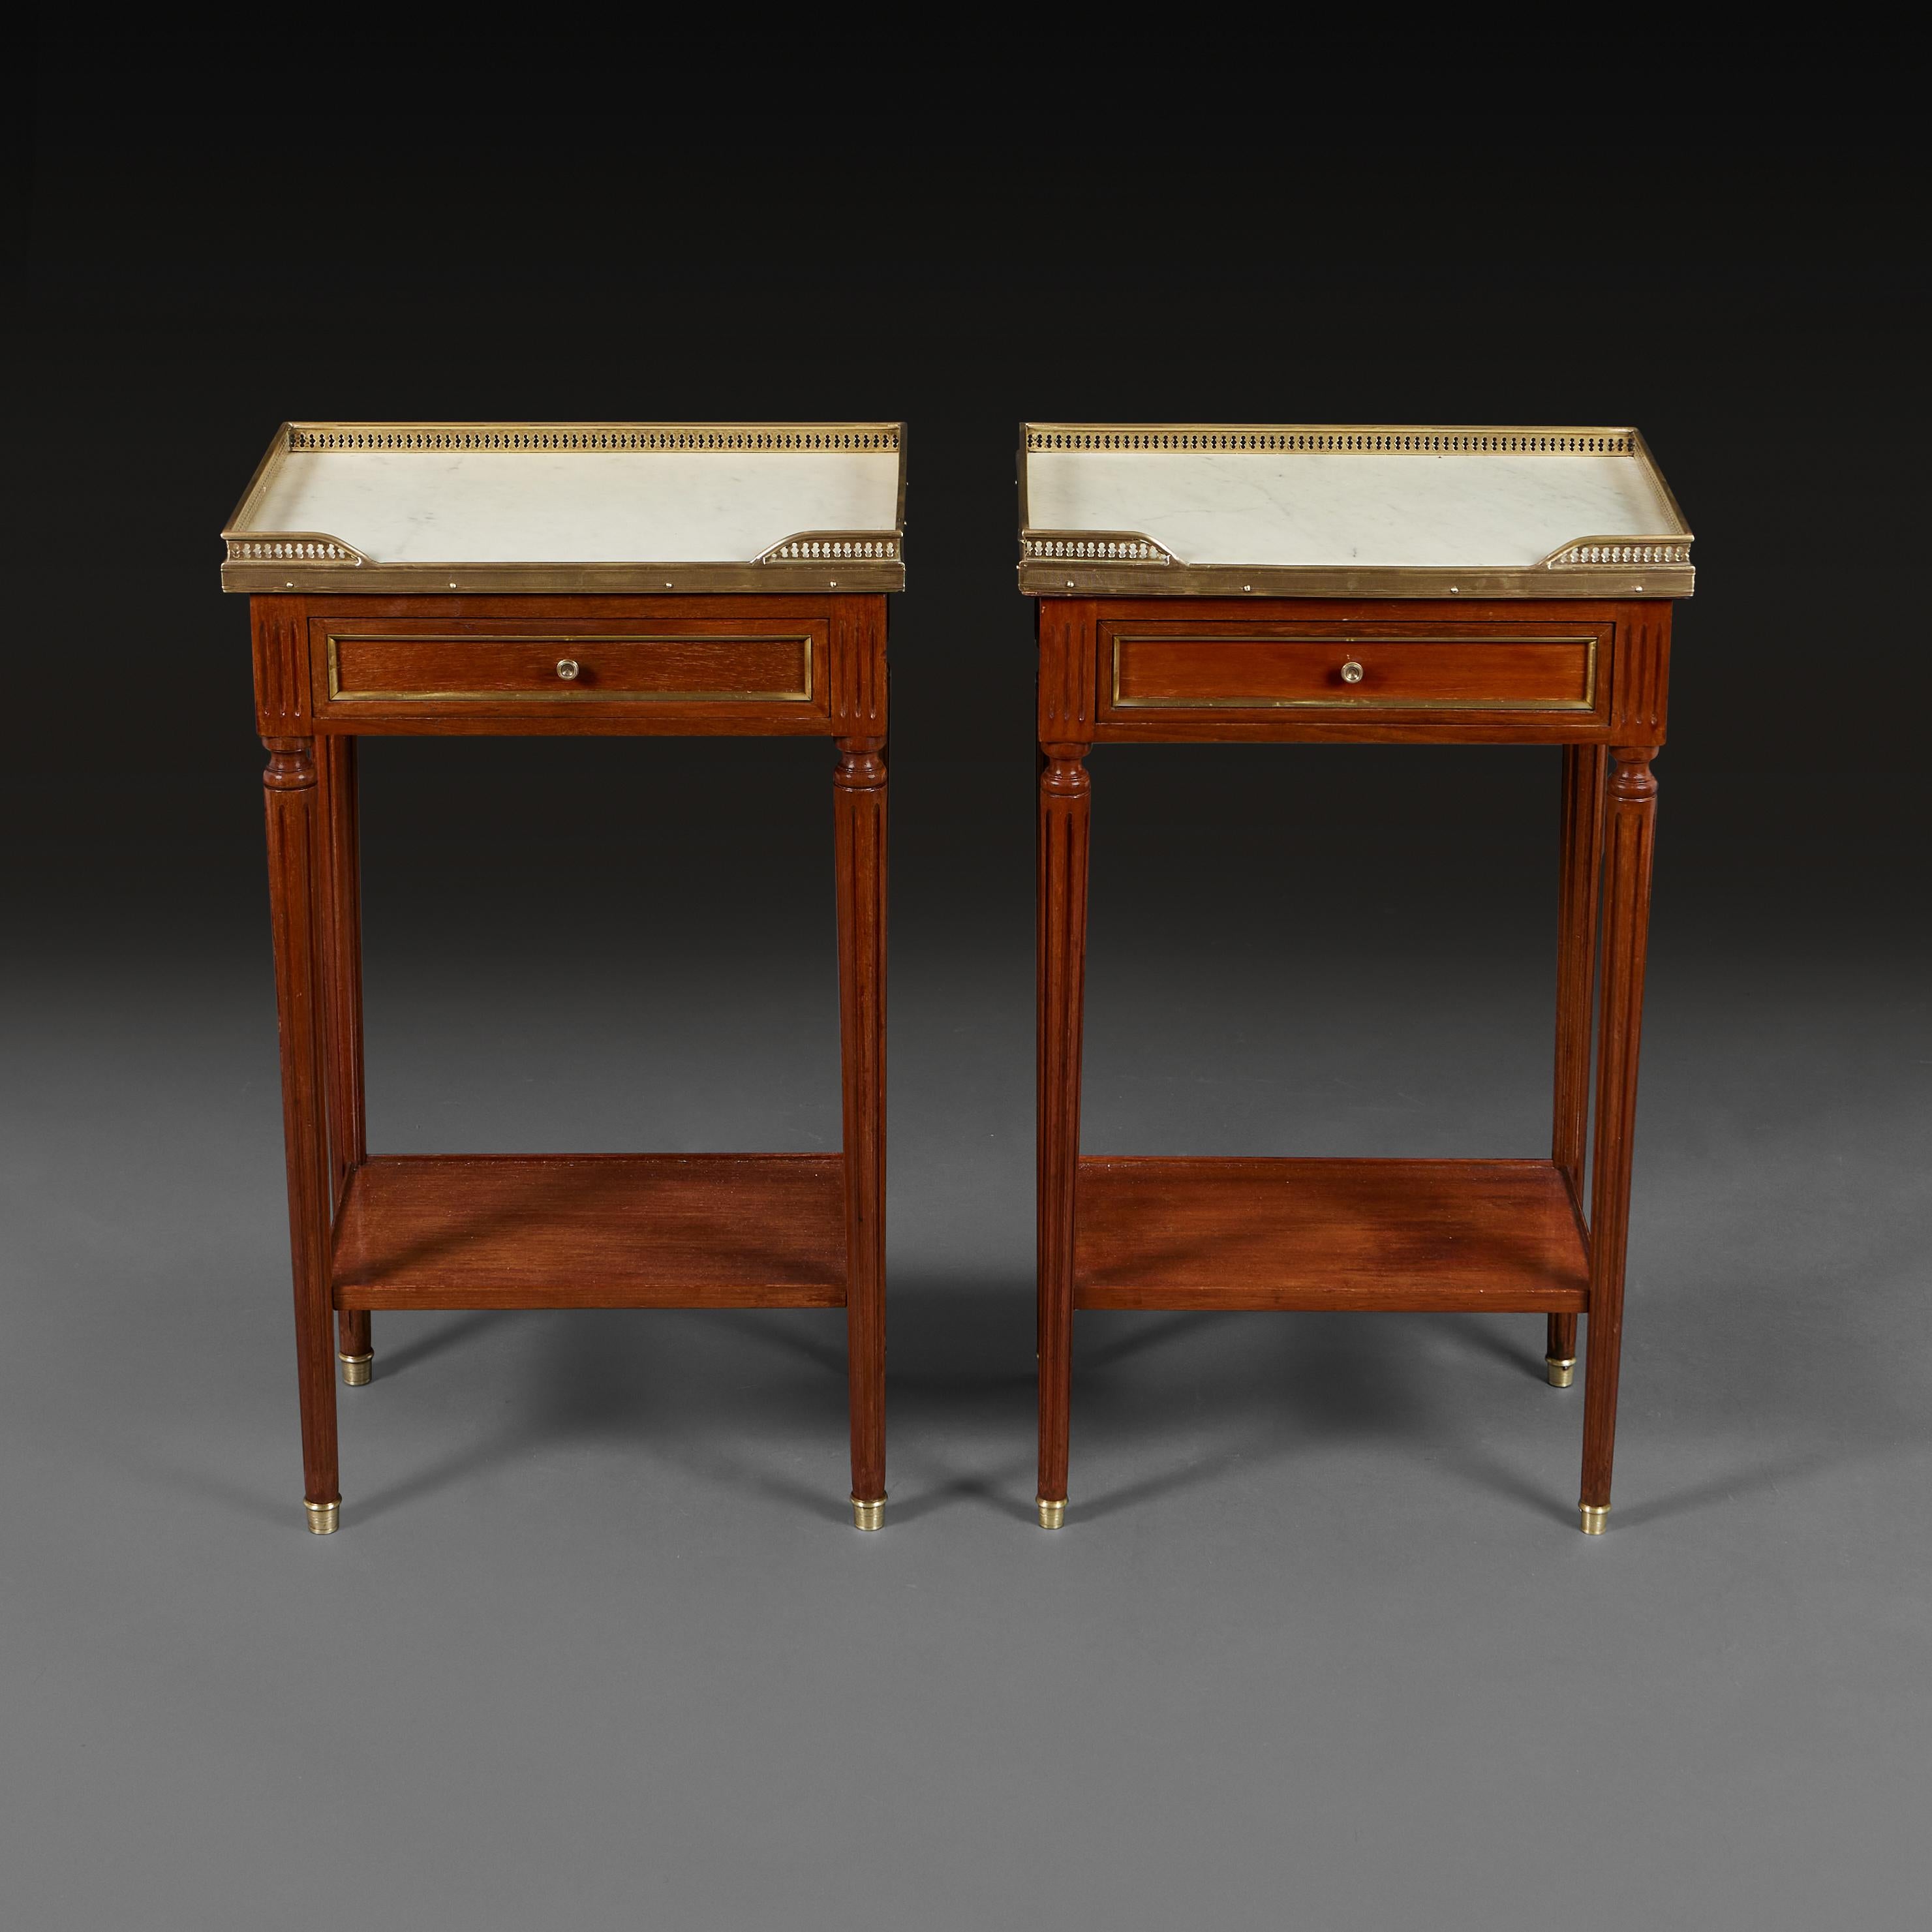 A Pair of Louis XVI Style Mahogany Bedside Tables  In Good Condition For Sale In London, GB